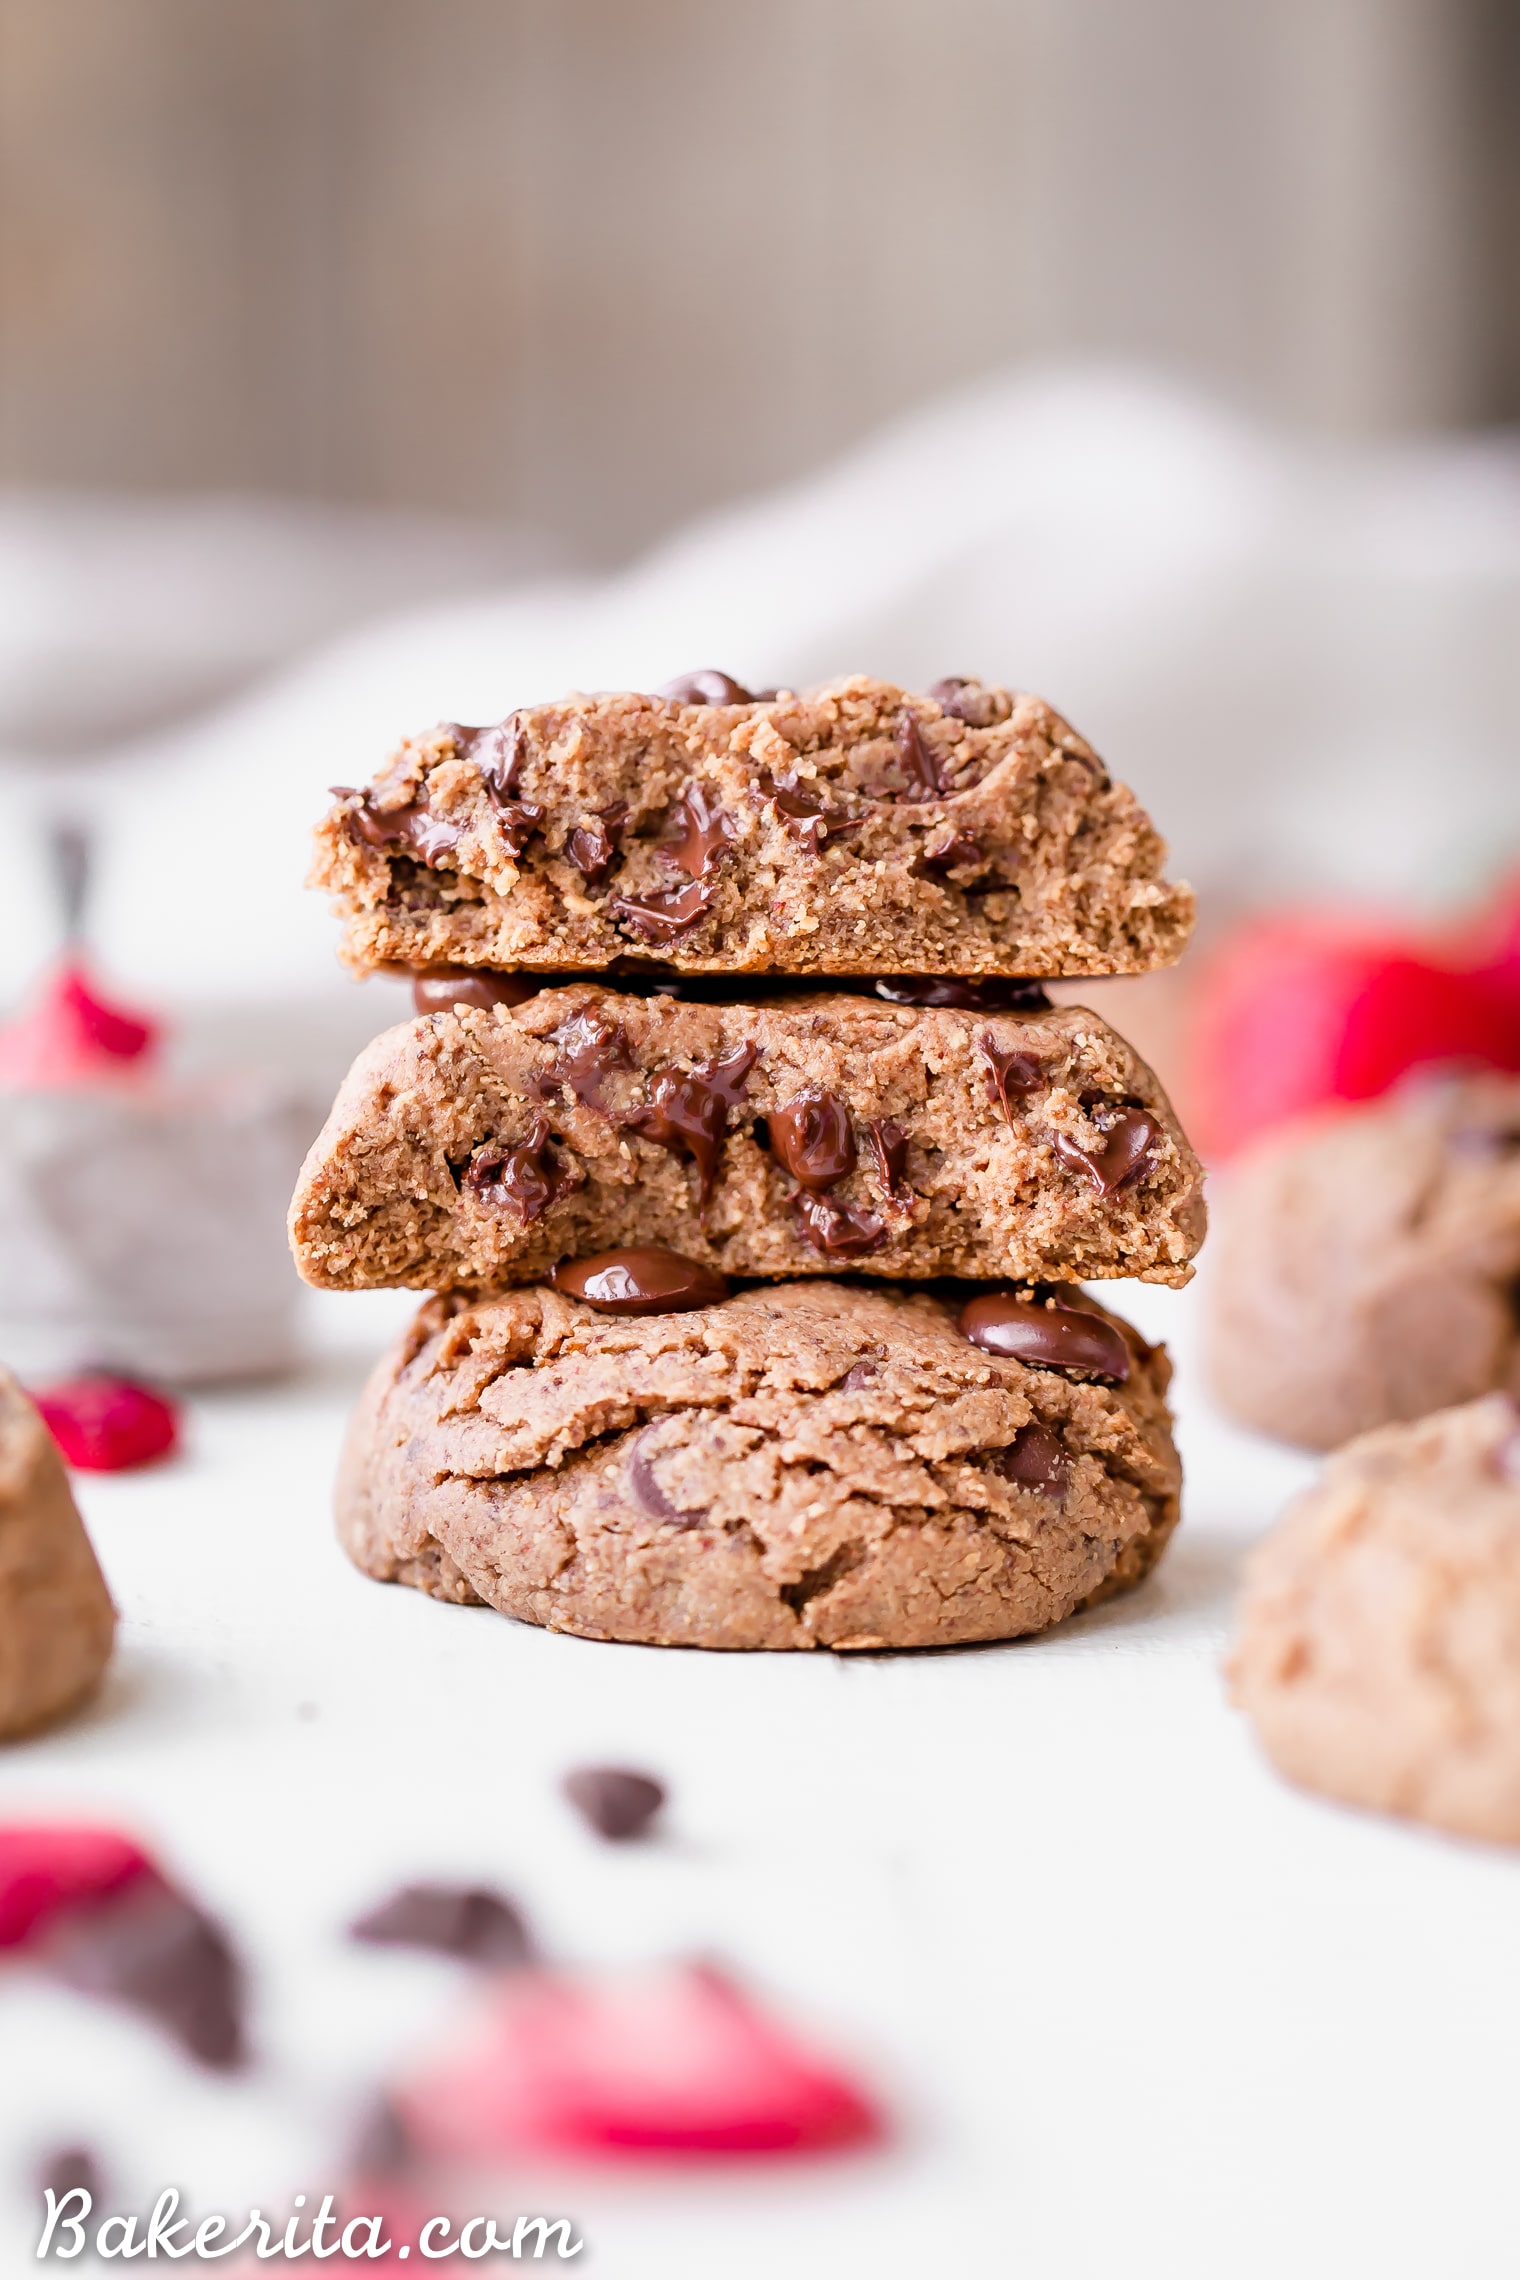 These Flourless Strawberry Chocolate Chip Cookies are thick, gooey and SO delicious, with a fruity strawberry flavor and melty chocolate chips. They're gluten-free, paleo, and vegan, and made with just six ingredients!